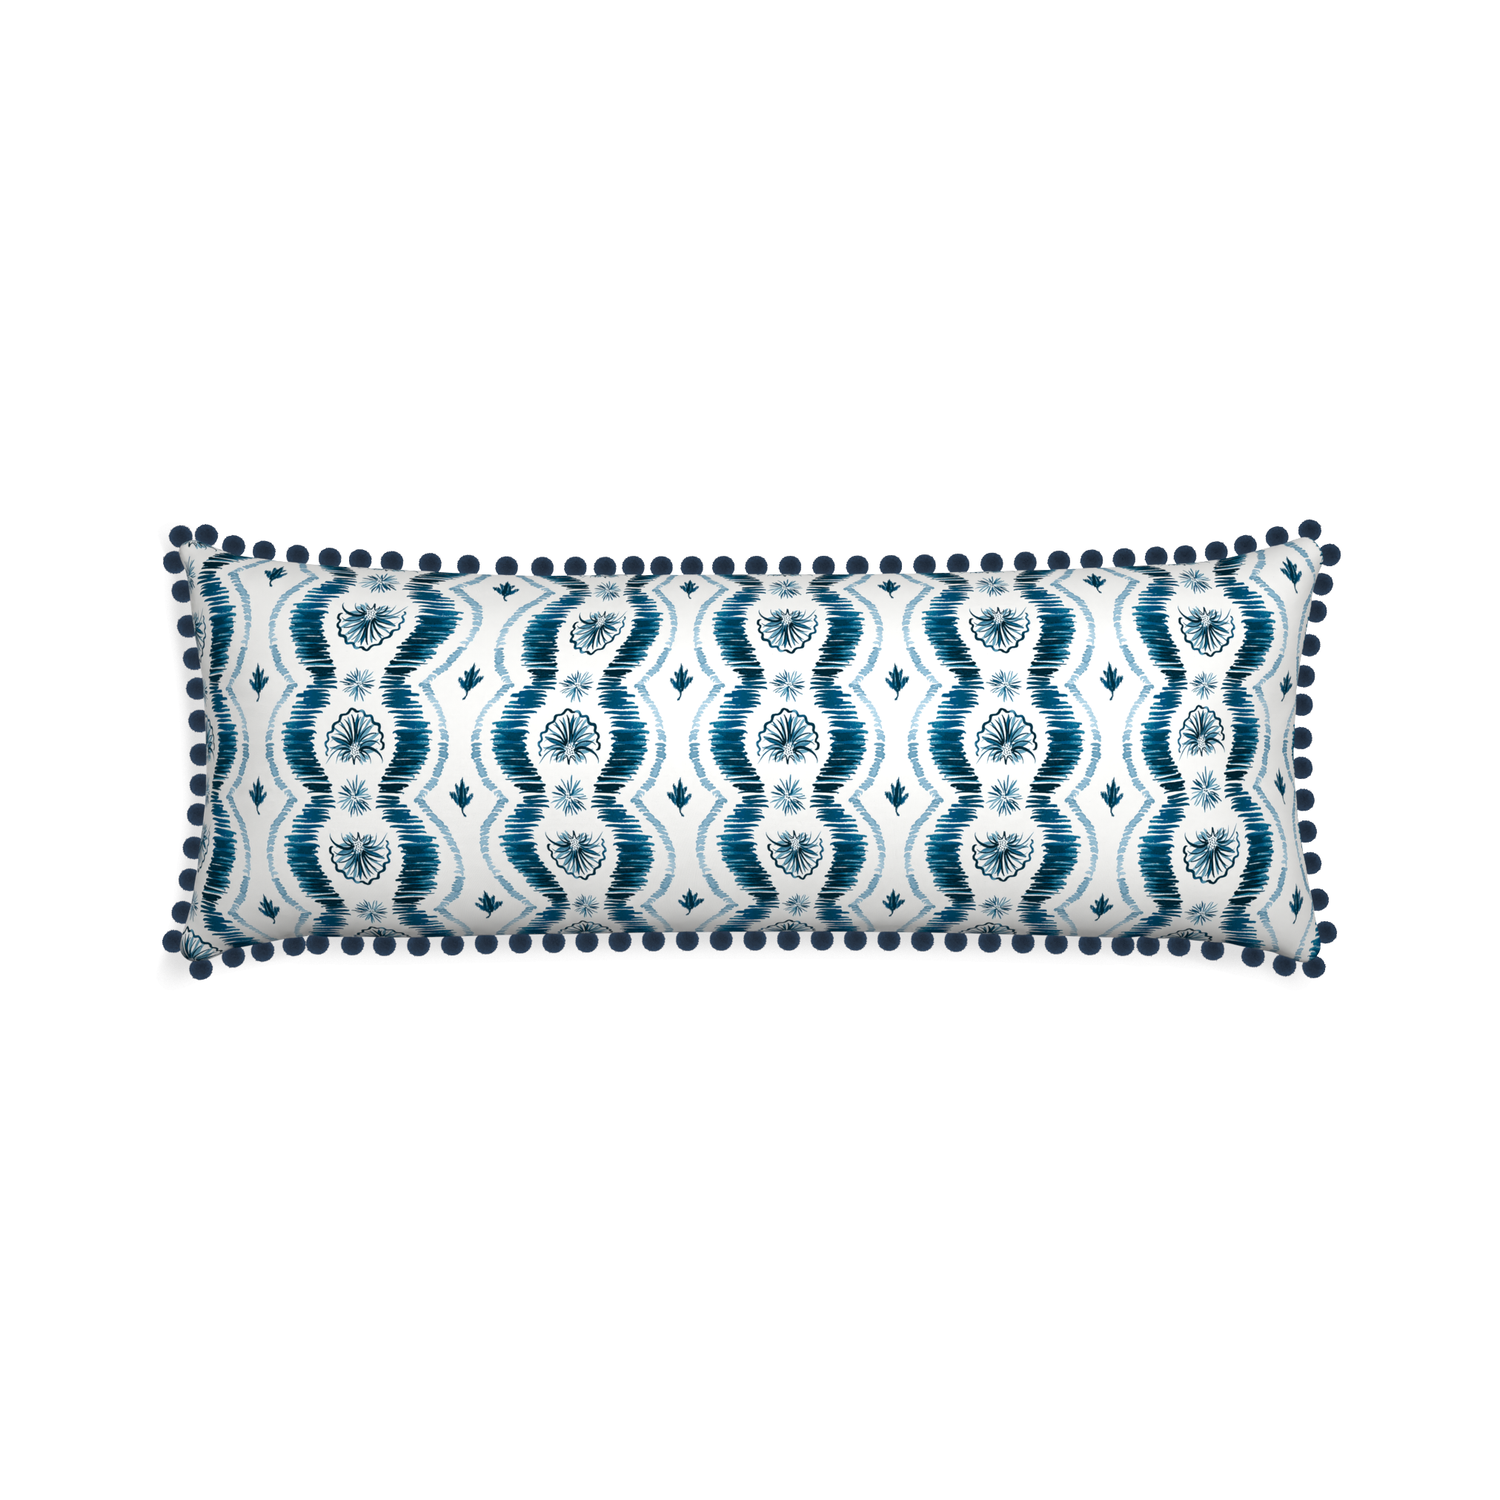 Xl-lumbar alice custom blue ikatpillow with c on white background